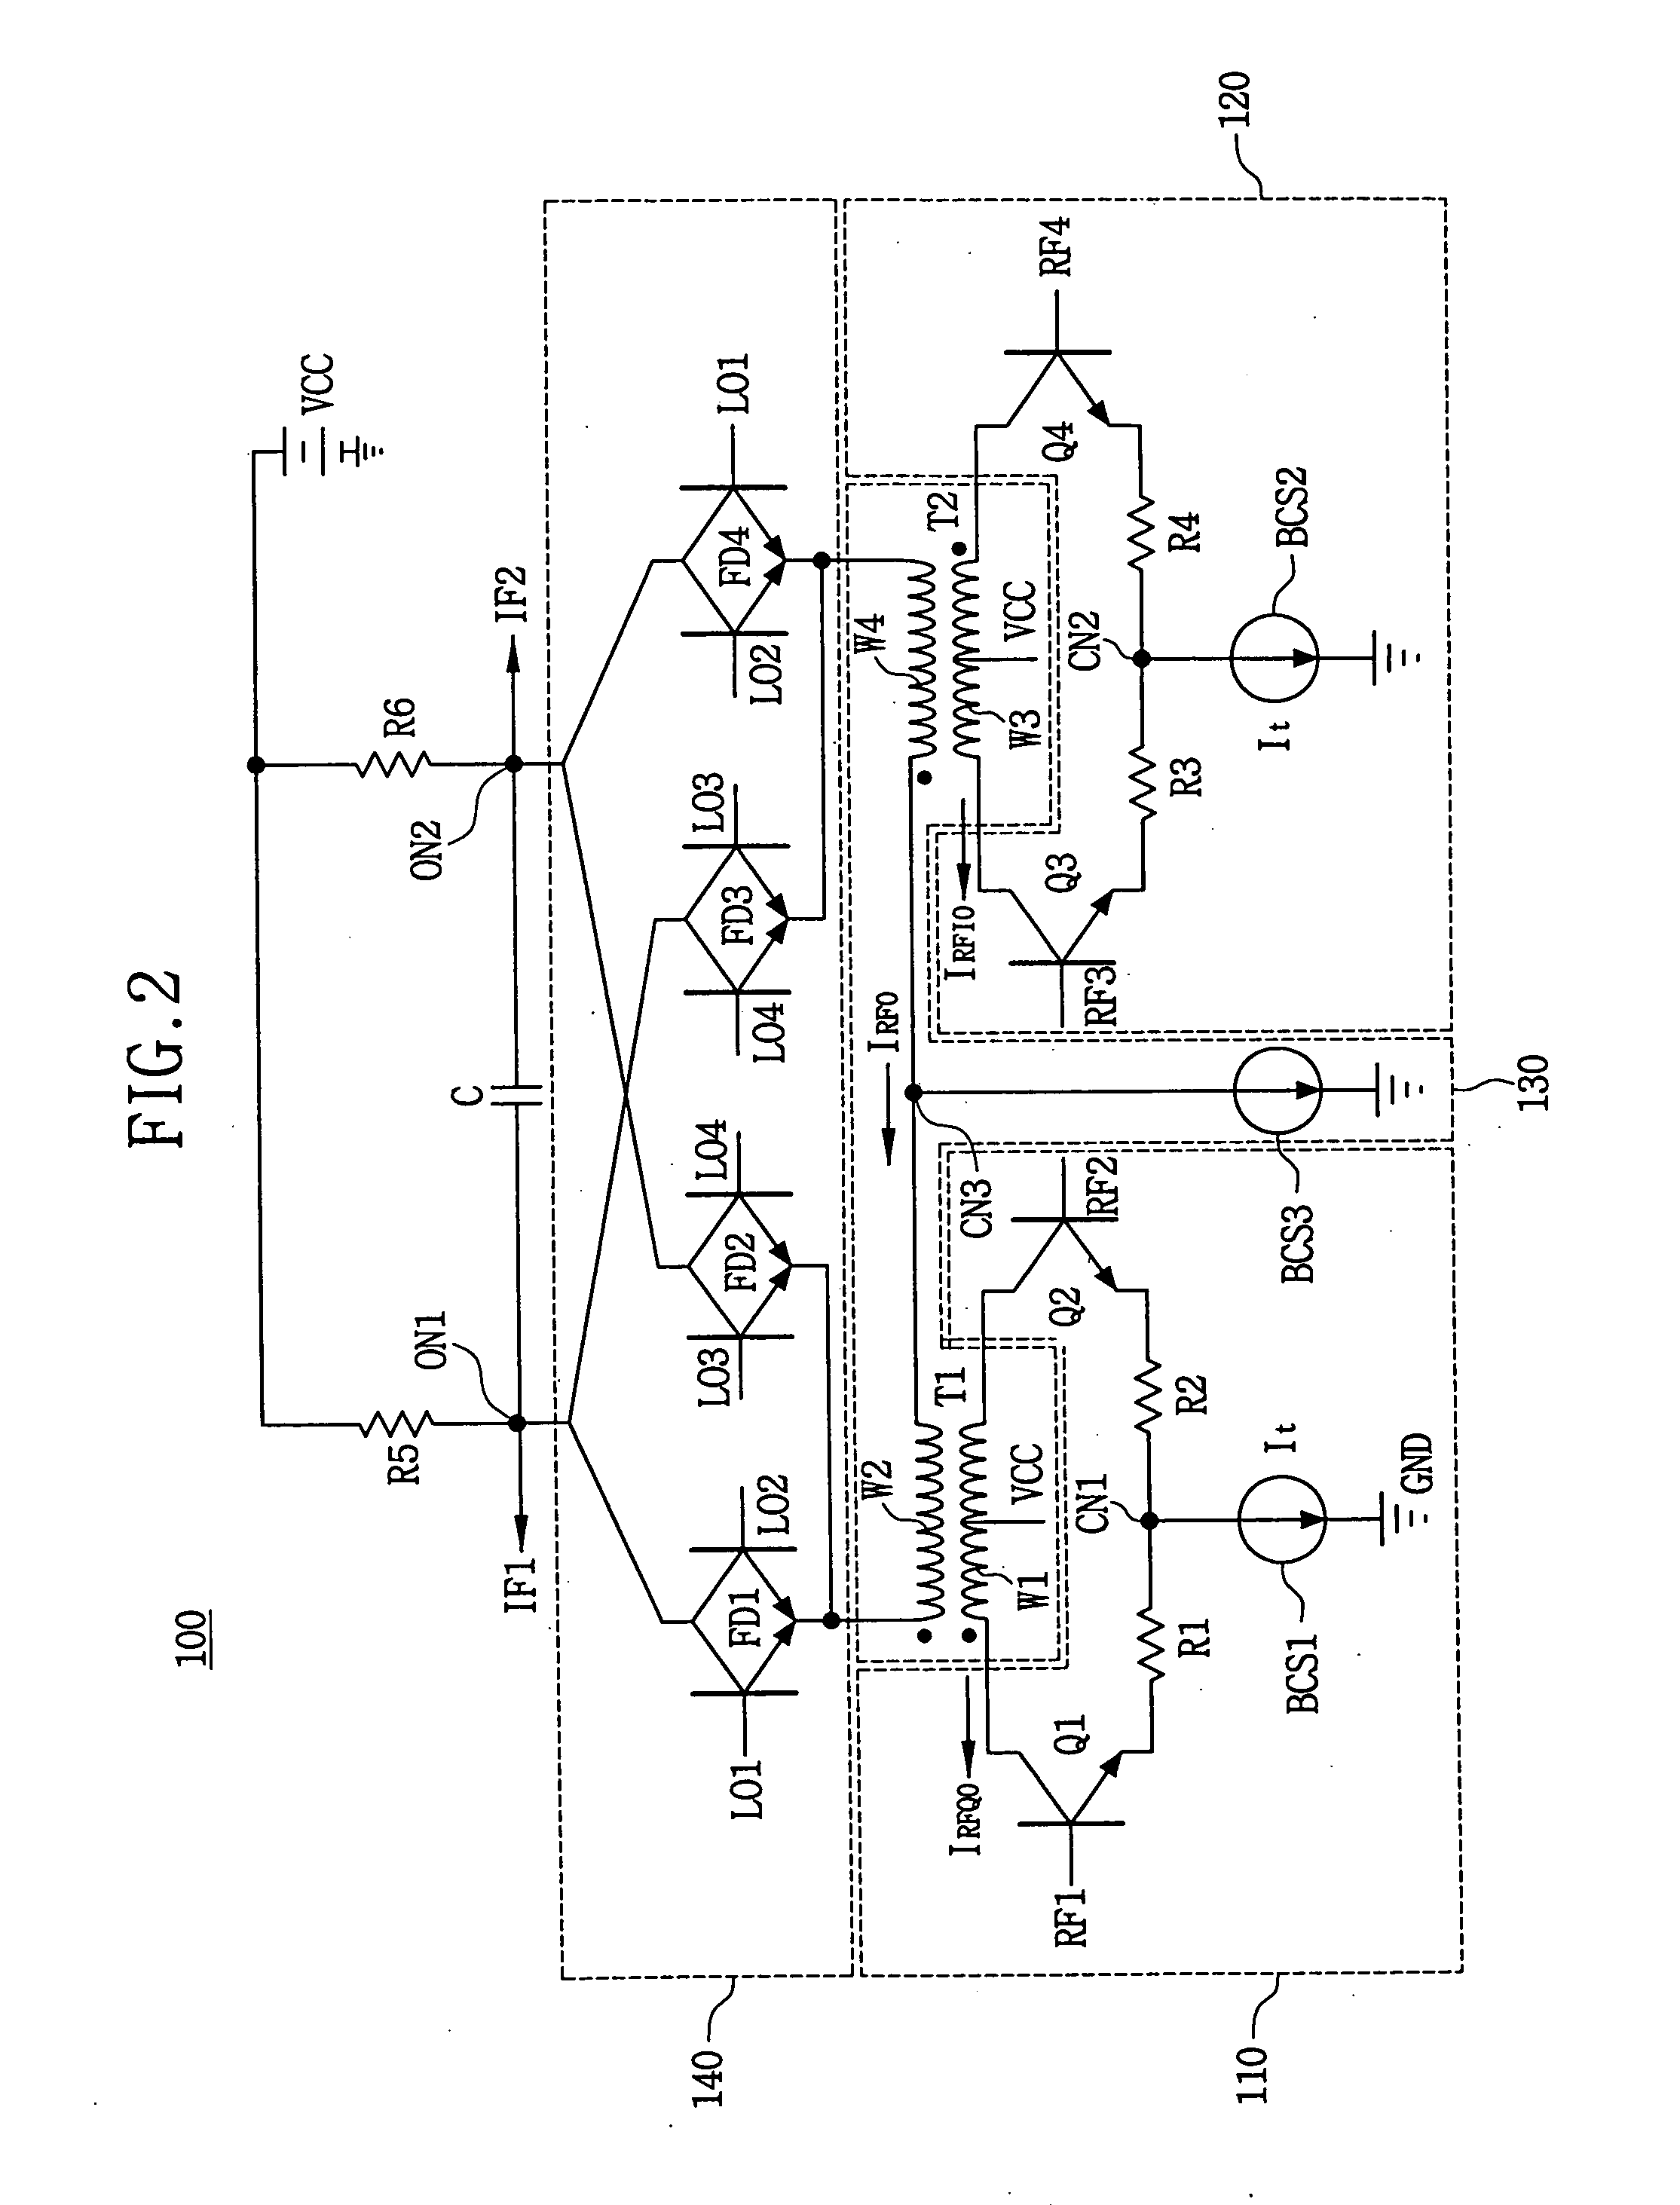 Circuit and method for receiving and mixing radio frequencies in a direct conversion receiver